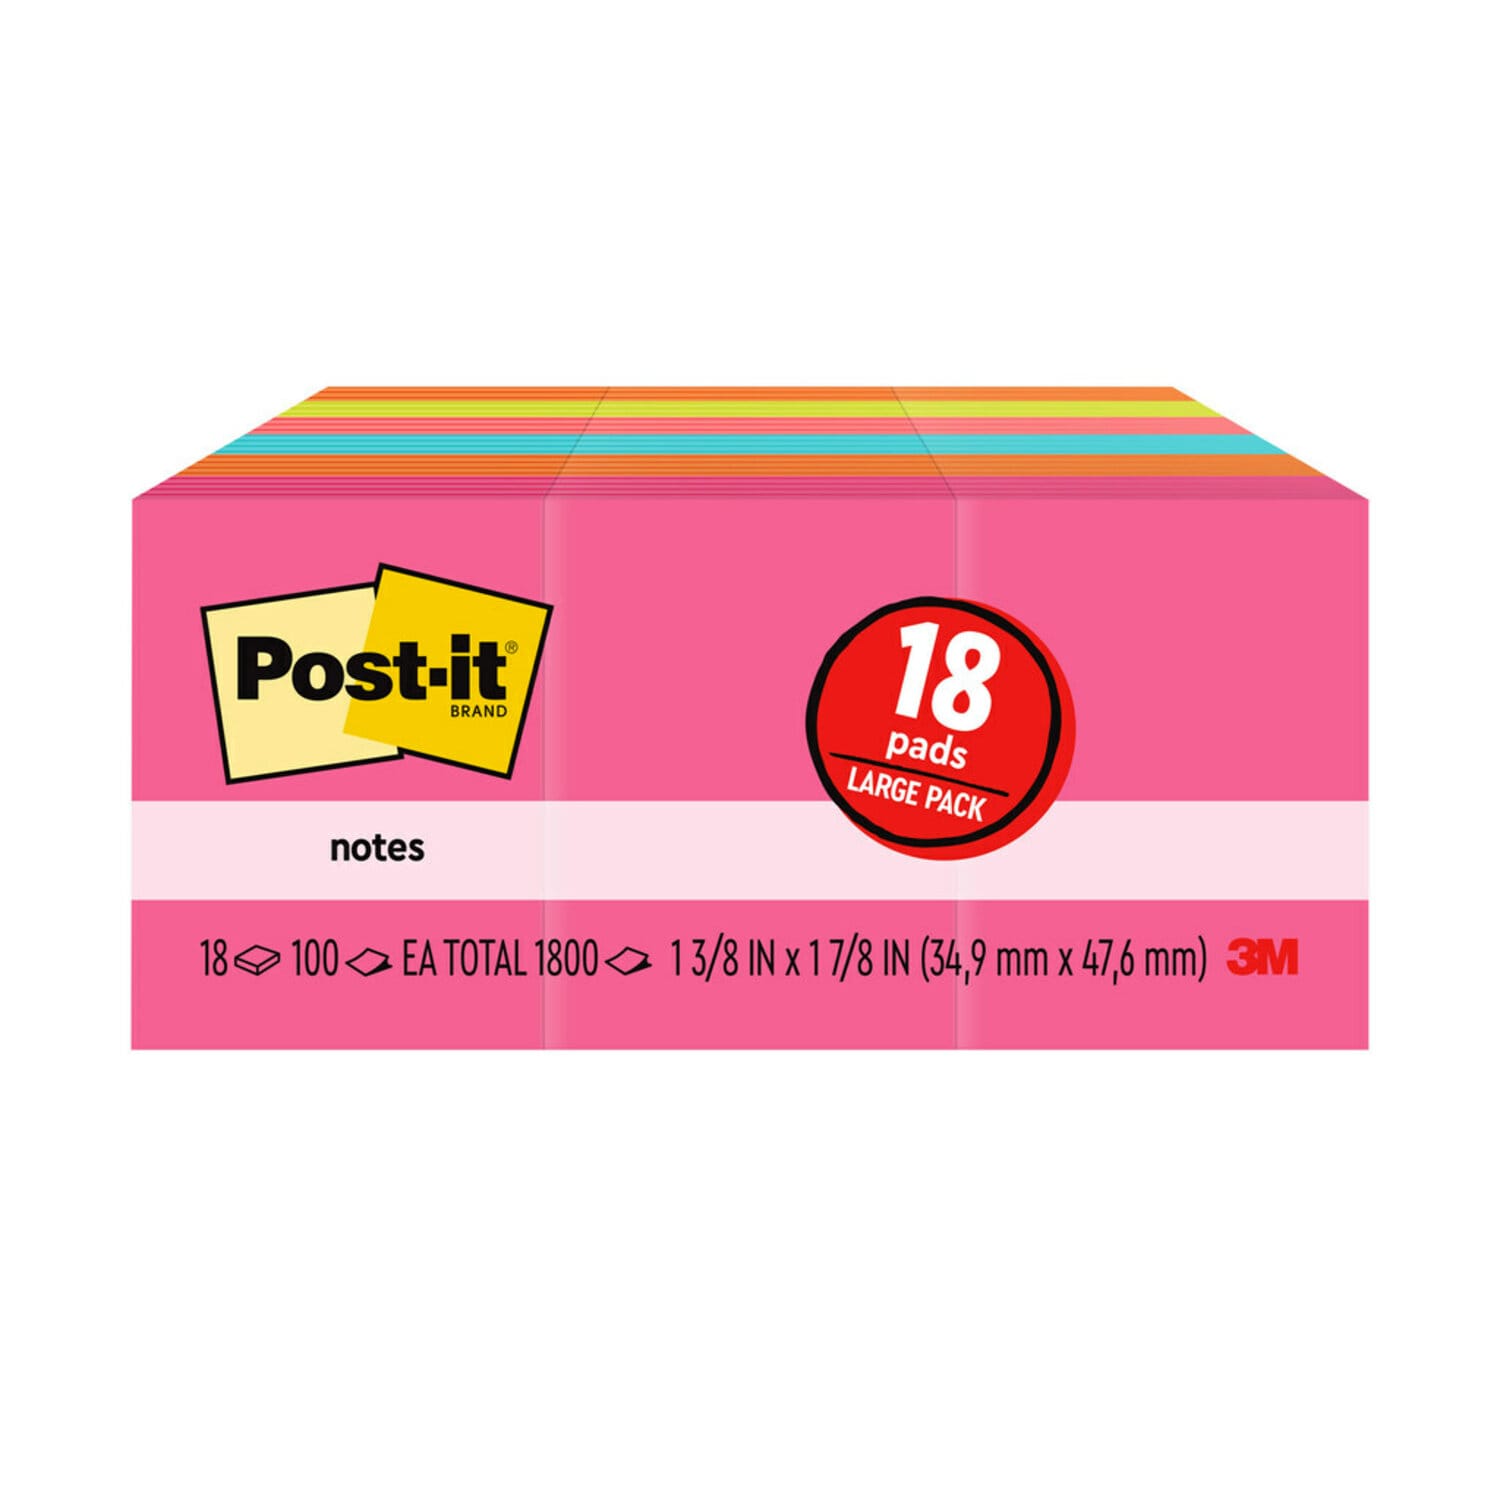 7100262110 - Post-it Notes 653-18AU, 1 3/8 in x 1 7/8 in (34.9 mm x 47.6 mm) Cape Town Colors